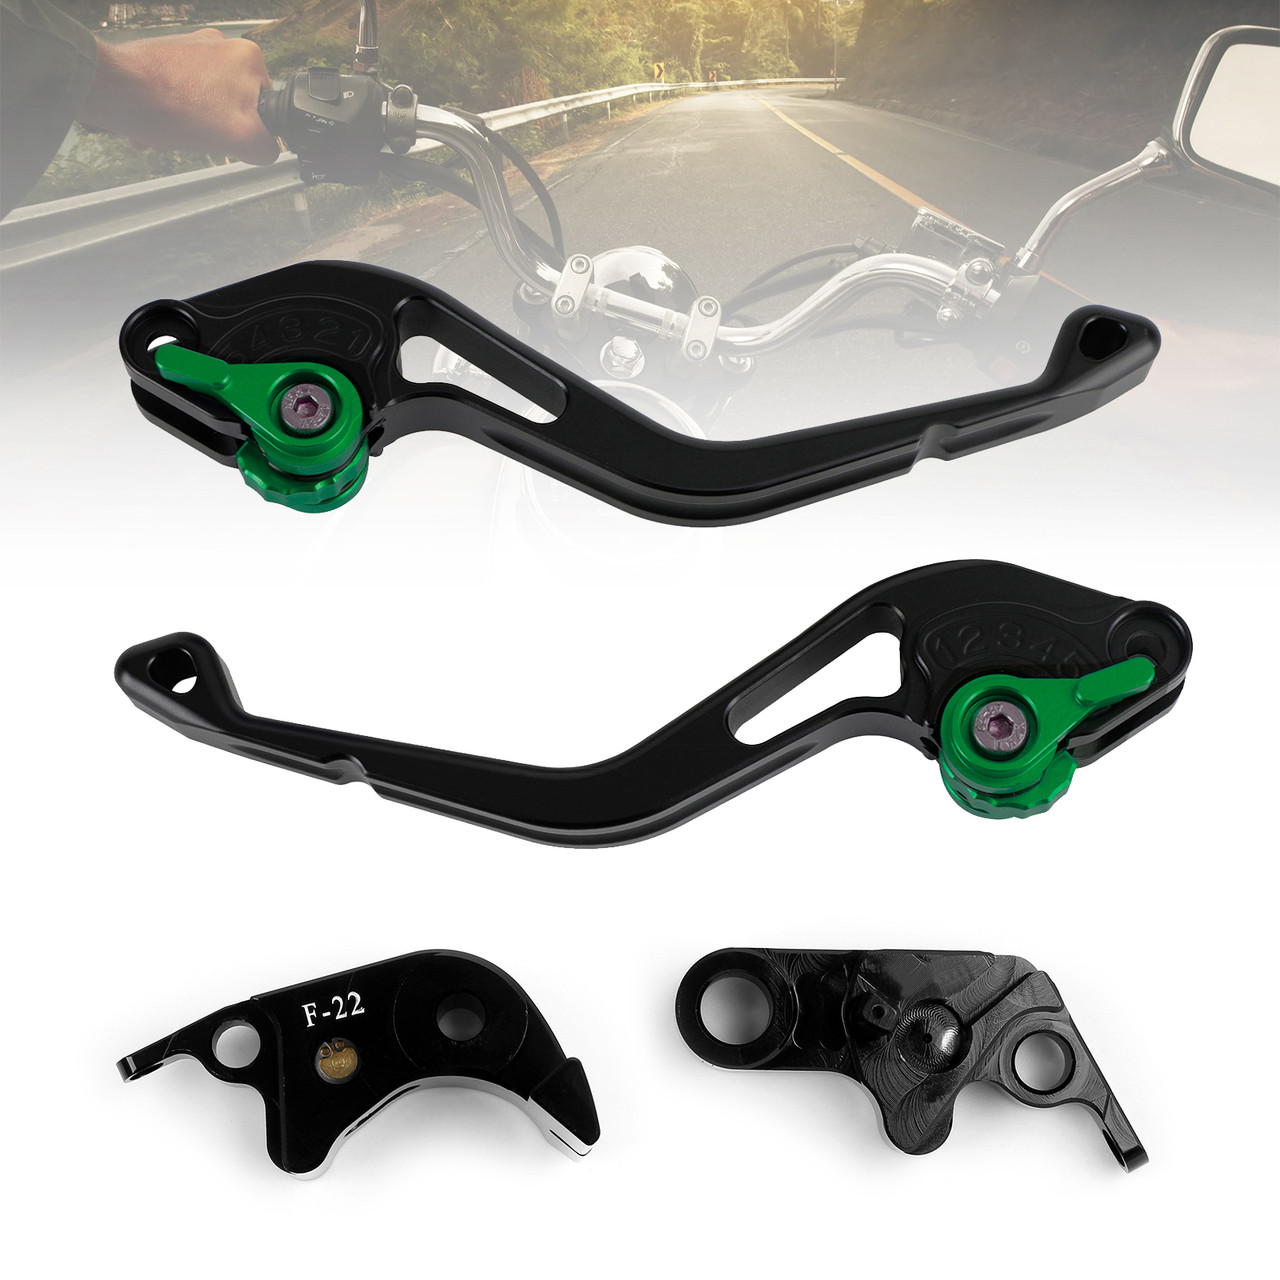 Short Clutch Brake Lever fit for BMW S1000R 2014 S1000RR 2010-2014